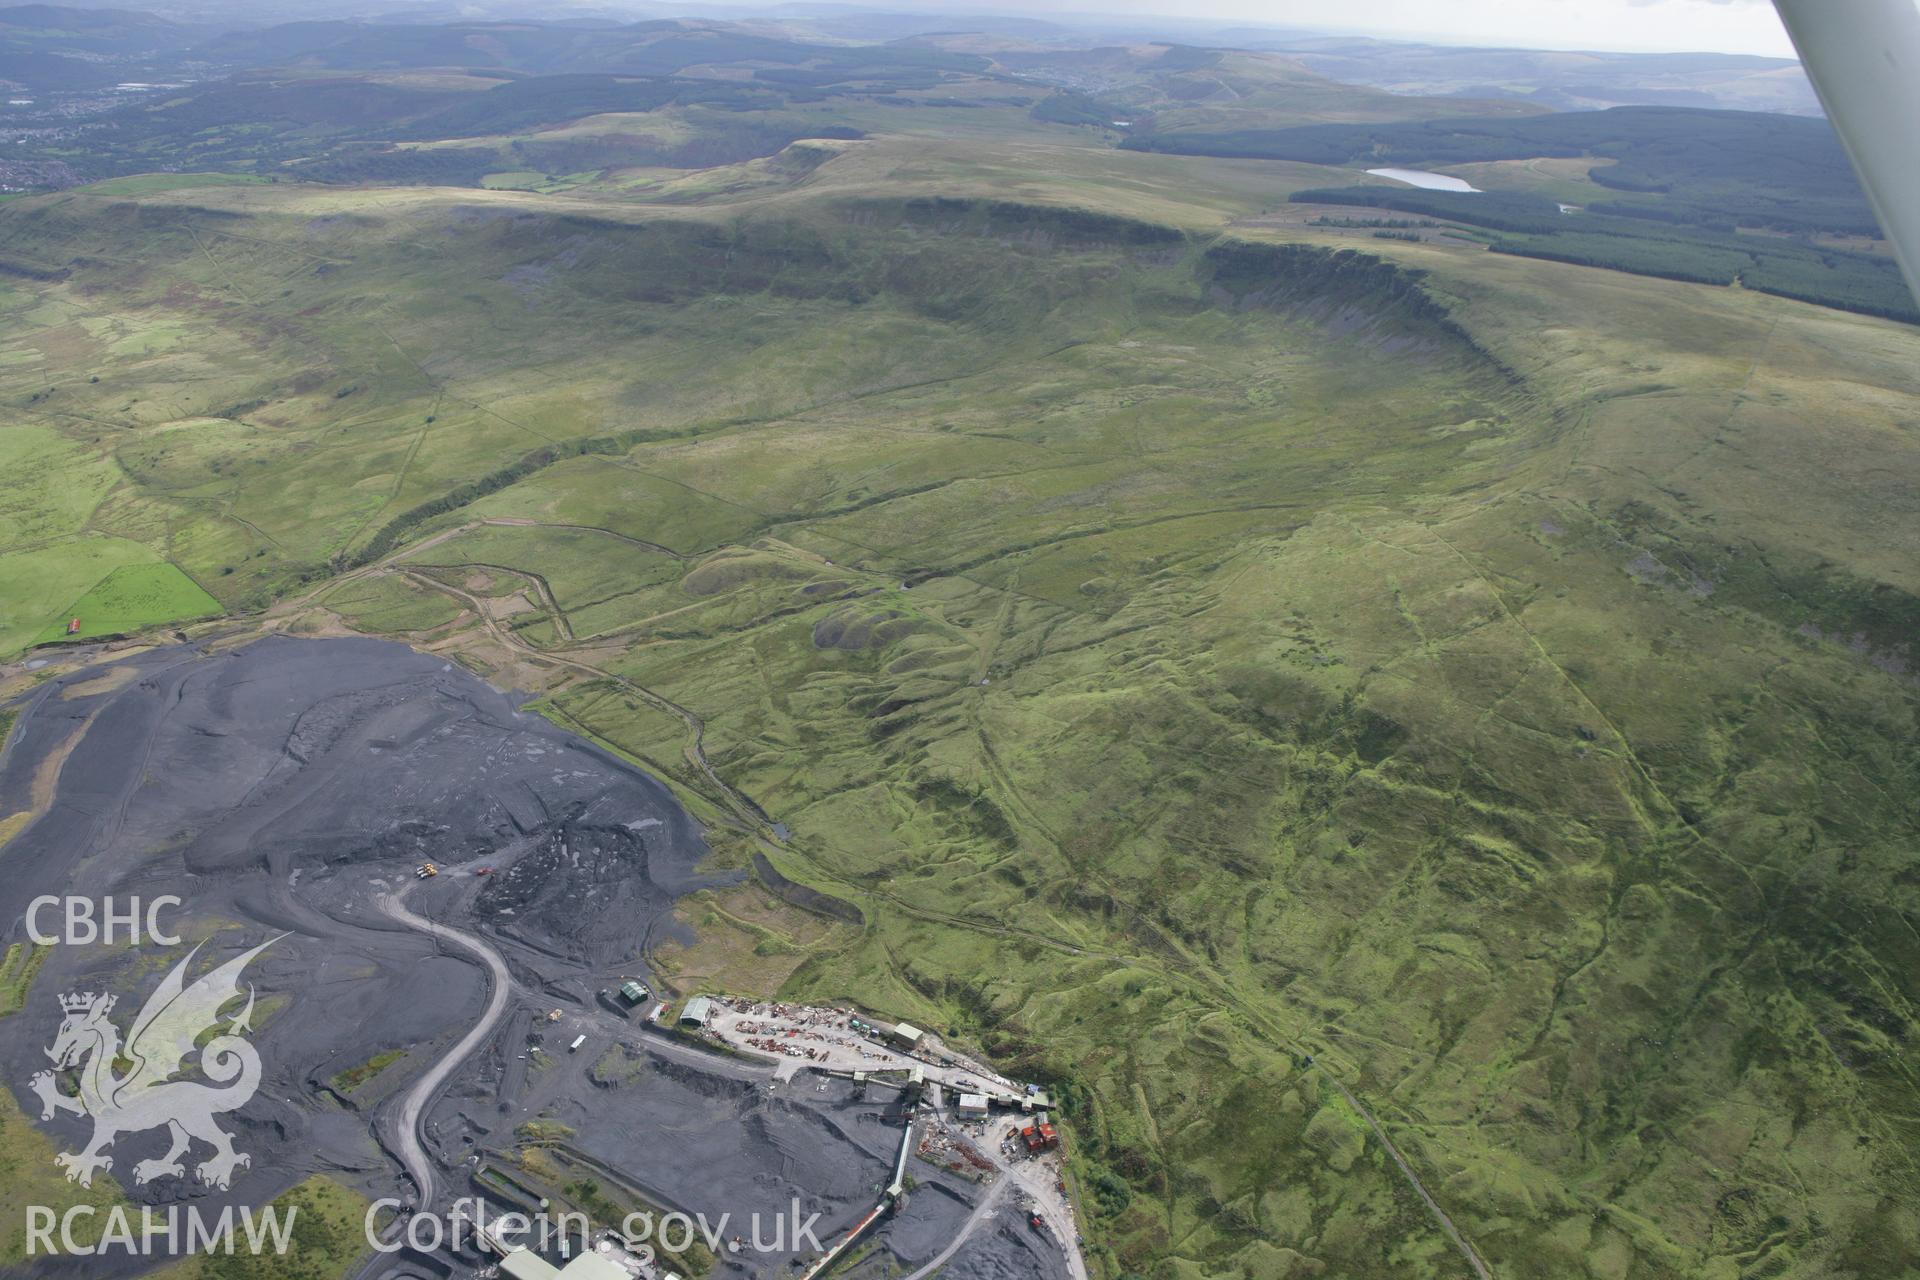 RCAHMW colour oblique photograph of Tower Drift Mine, Hirwaun, looking south over Hirwaun Common. Taken by Toby Driver on 12/09/2008.